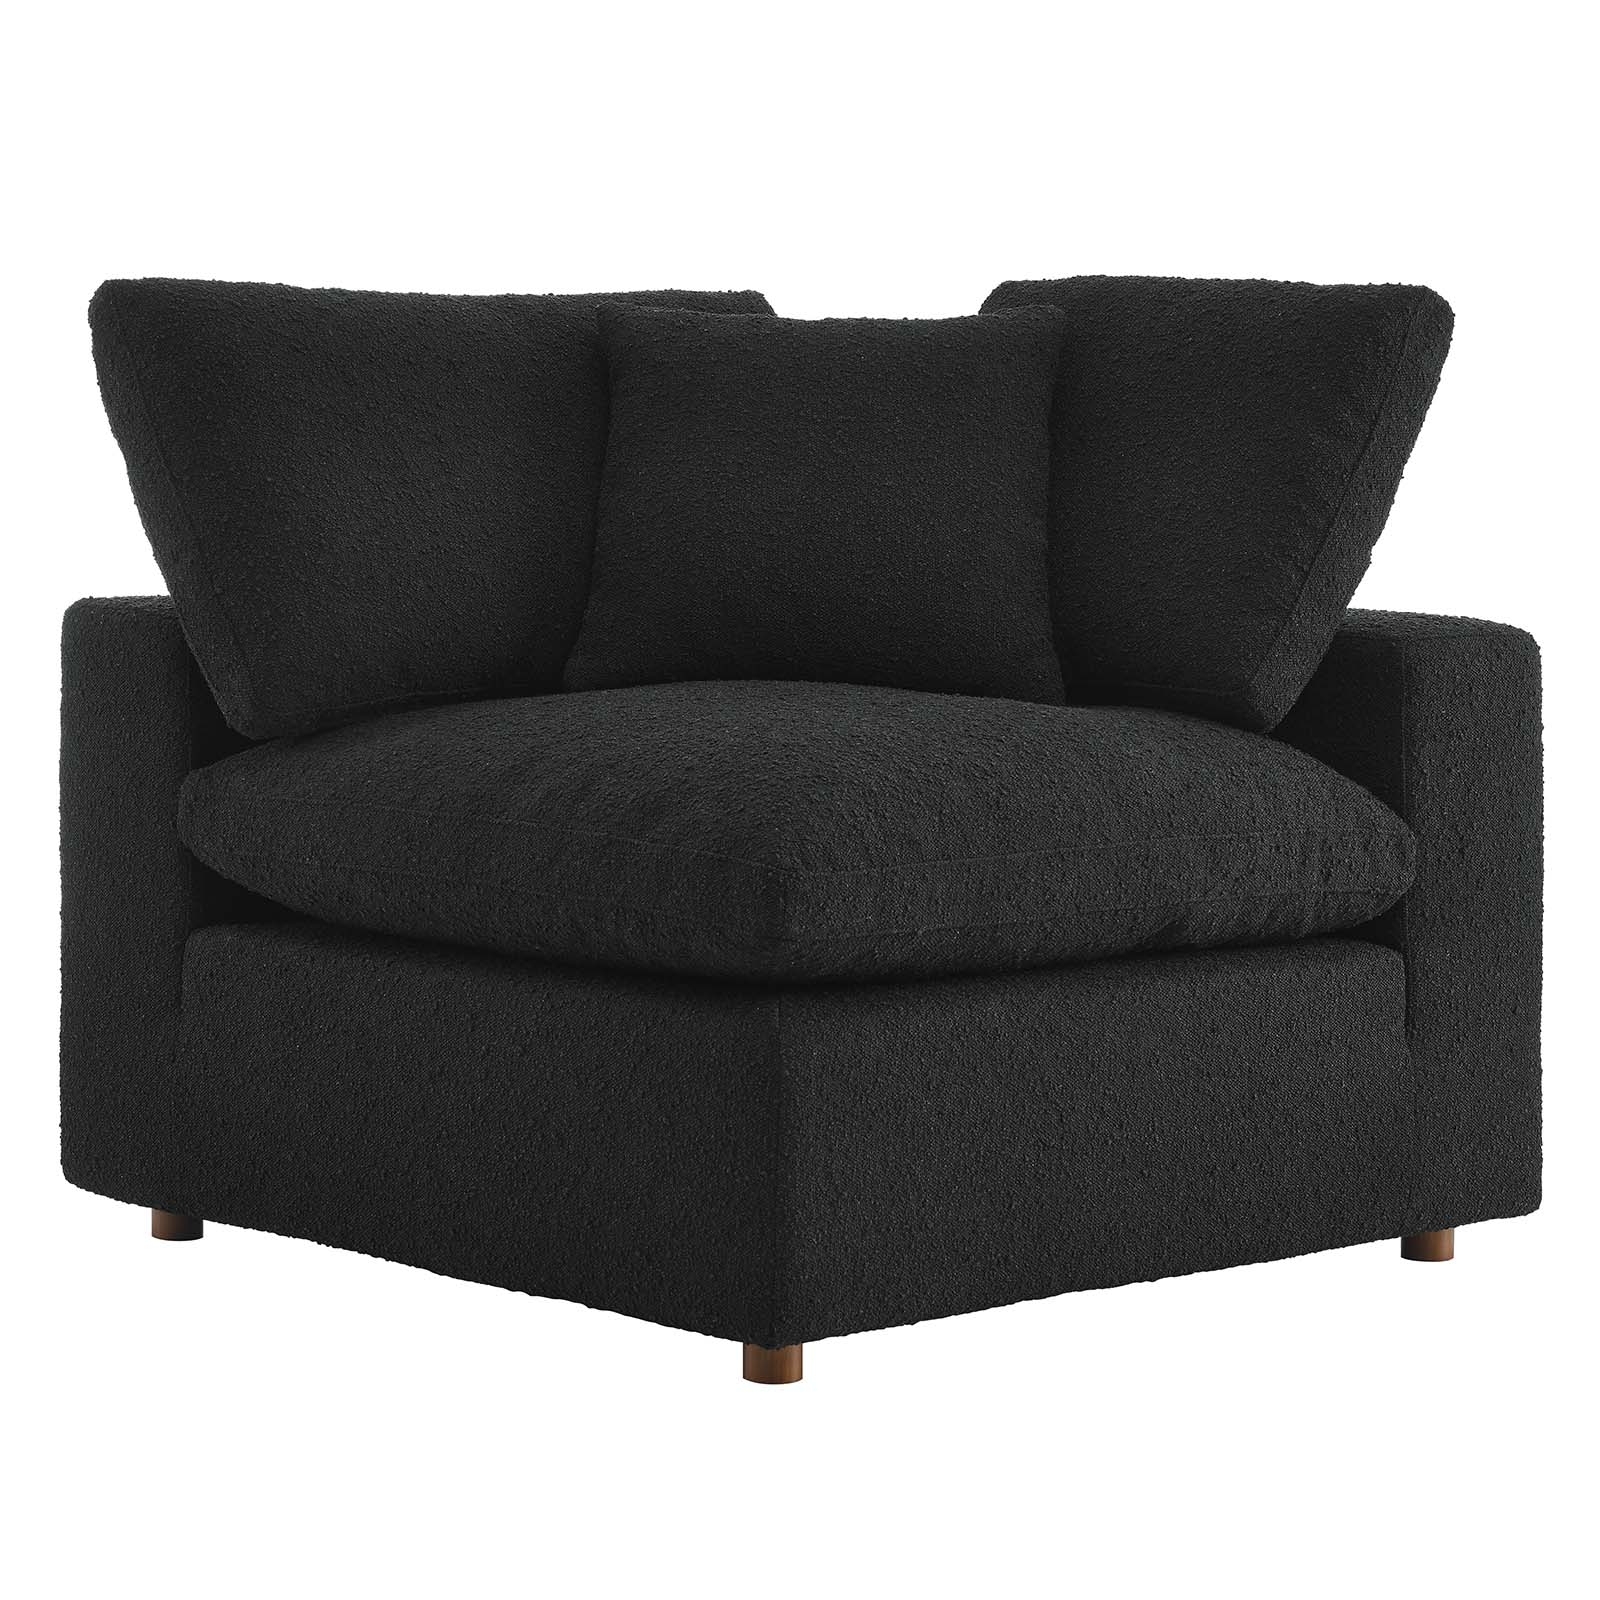 Commix Down Filled Overstuffed Boucle Fabric Corner Chair, Black